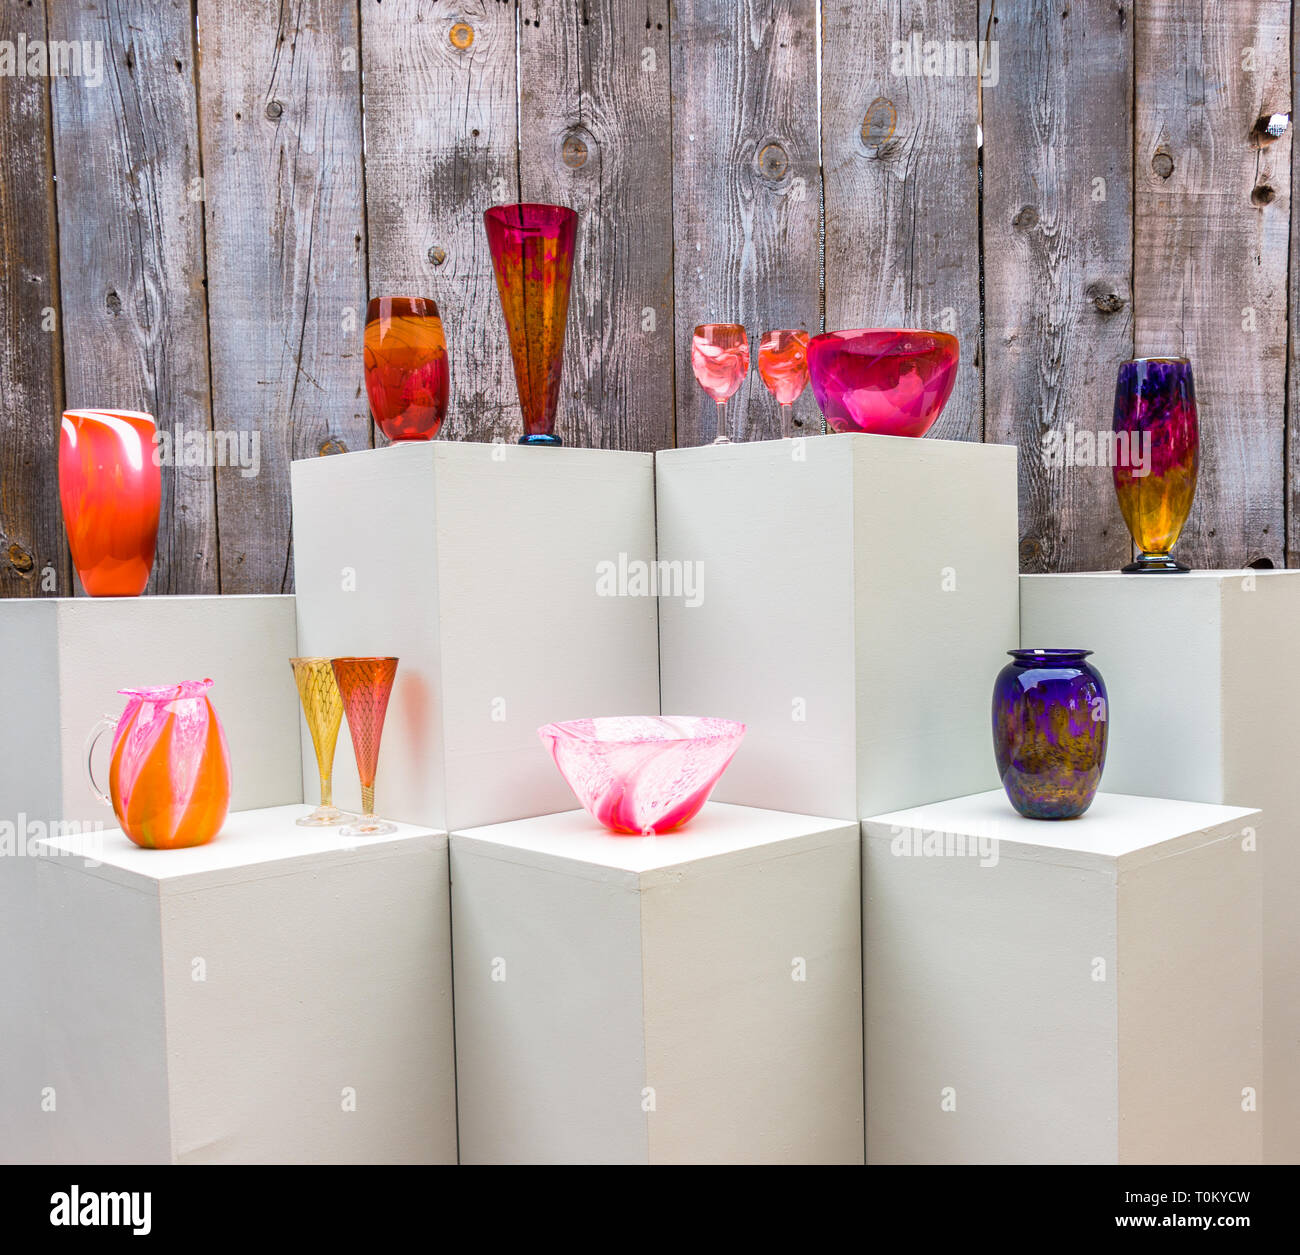 Glass Decorative Accessories are tools for decoration. Interior or home decor to bring color to your rooms and work place. The photo has bowls, cups. Stock Photo